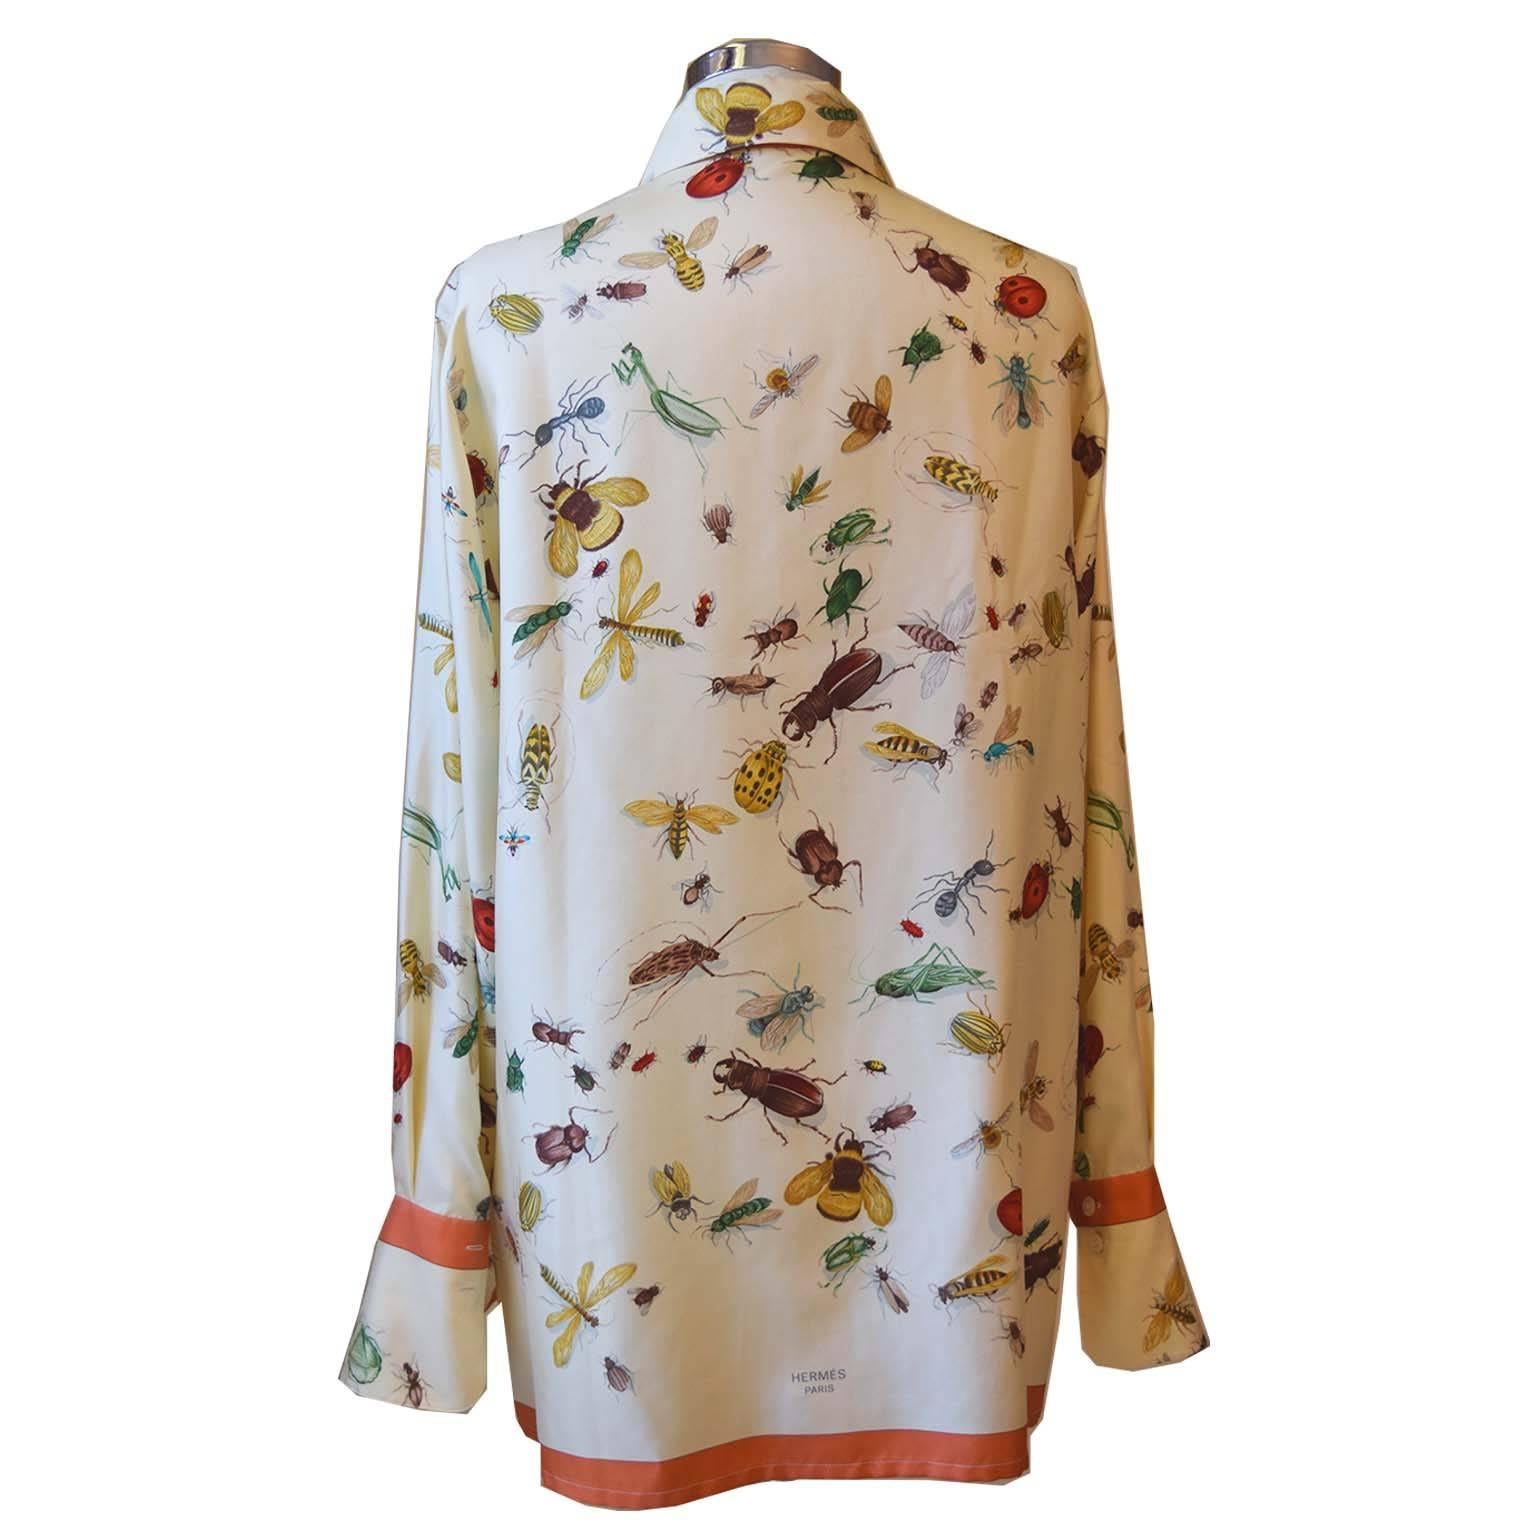 Hermes vintage 100% silk long sleeve shirt size 42 FR Les Insects at ...